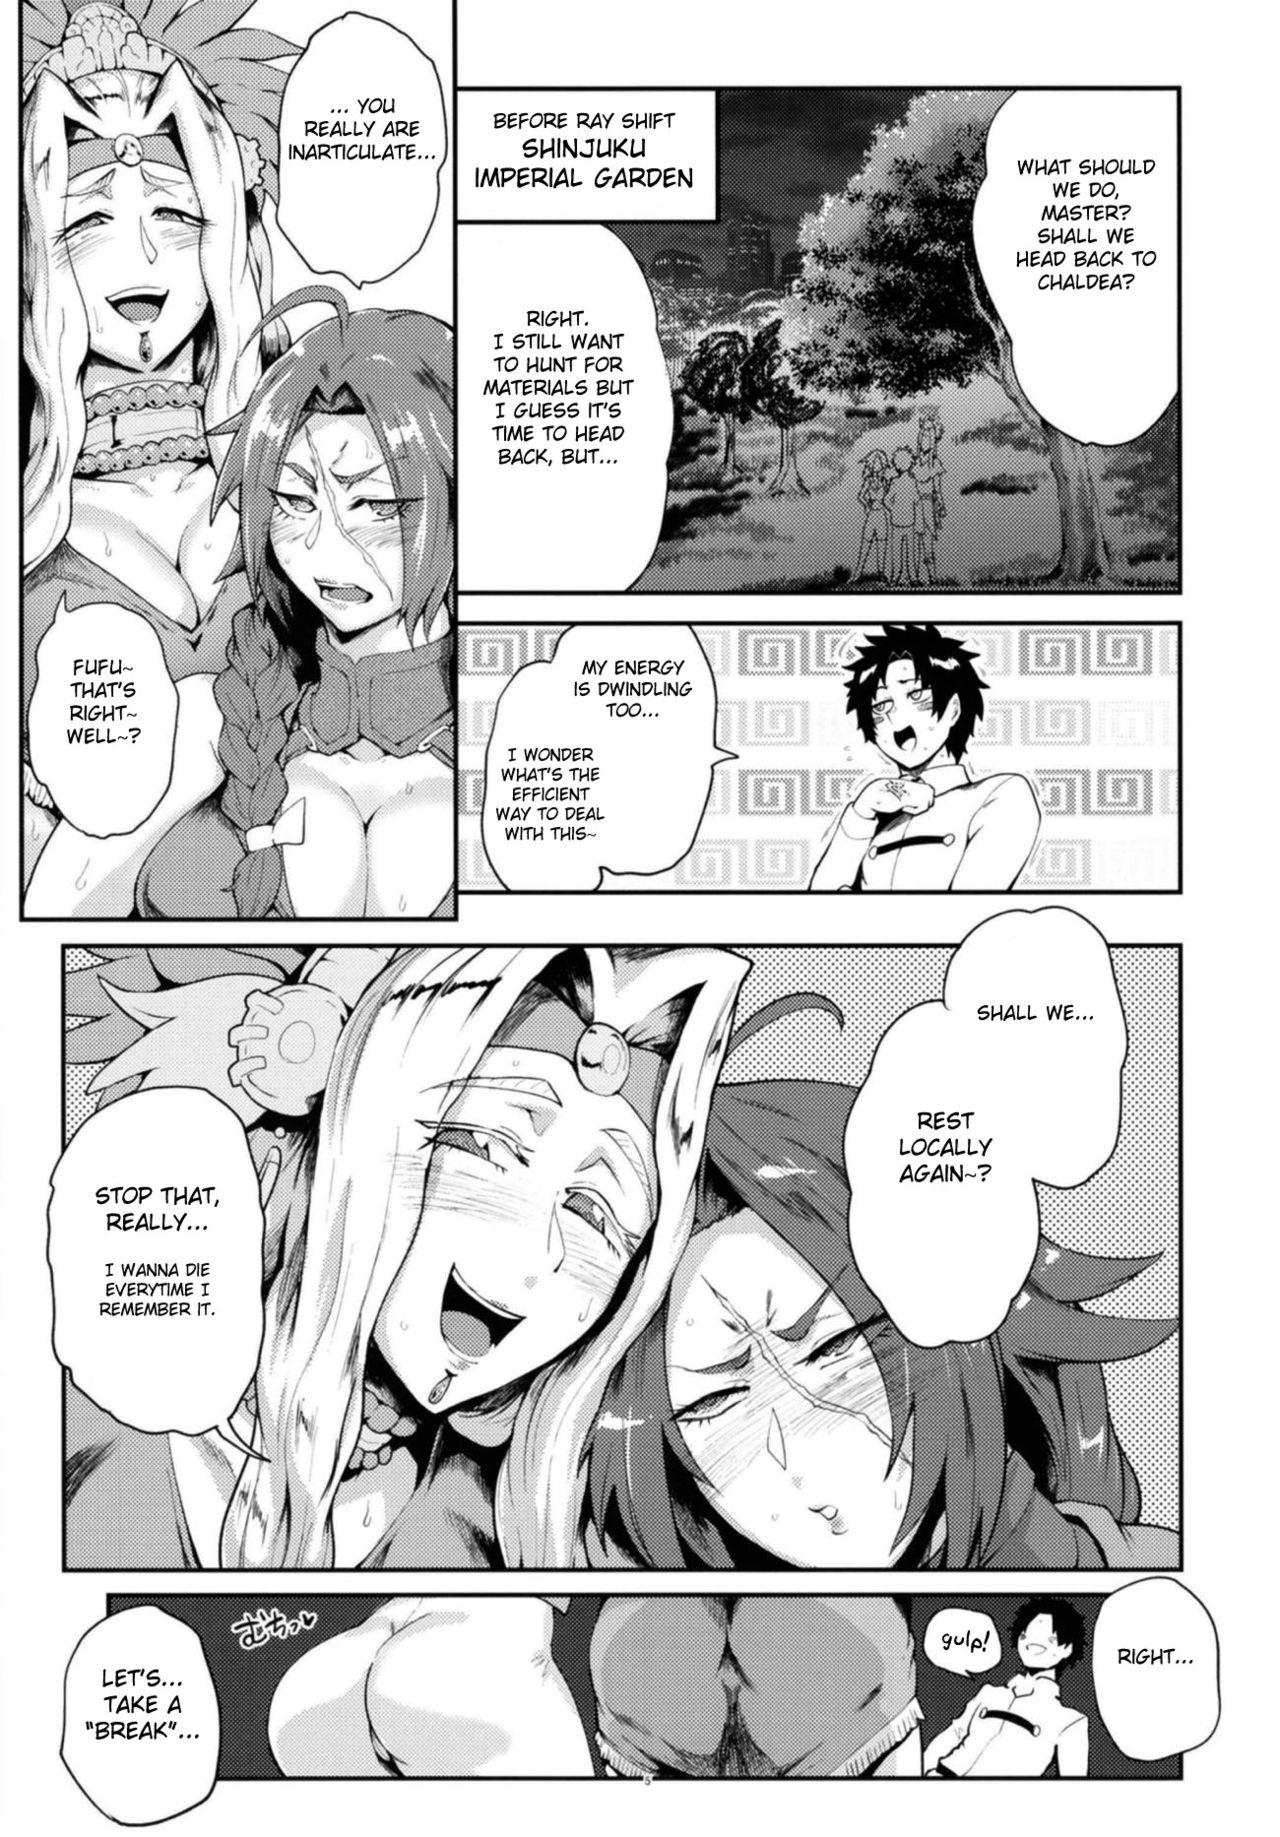 Girlsfucking R2D4 - Fate grand order Caught - Page 4